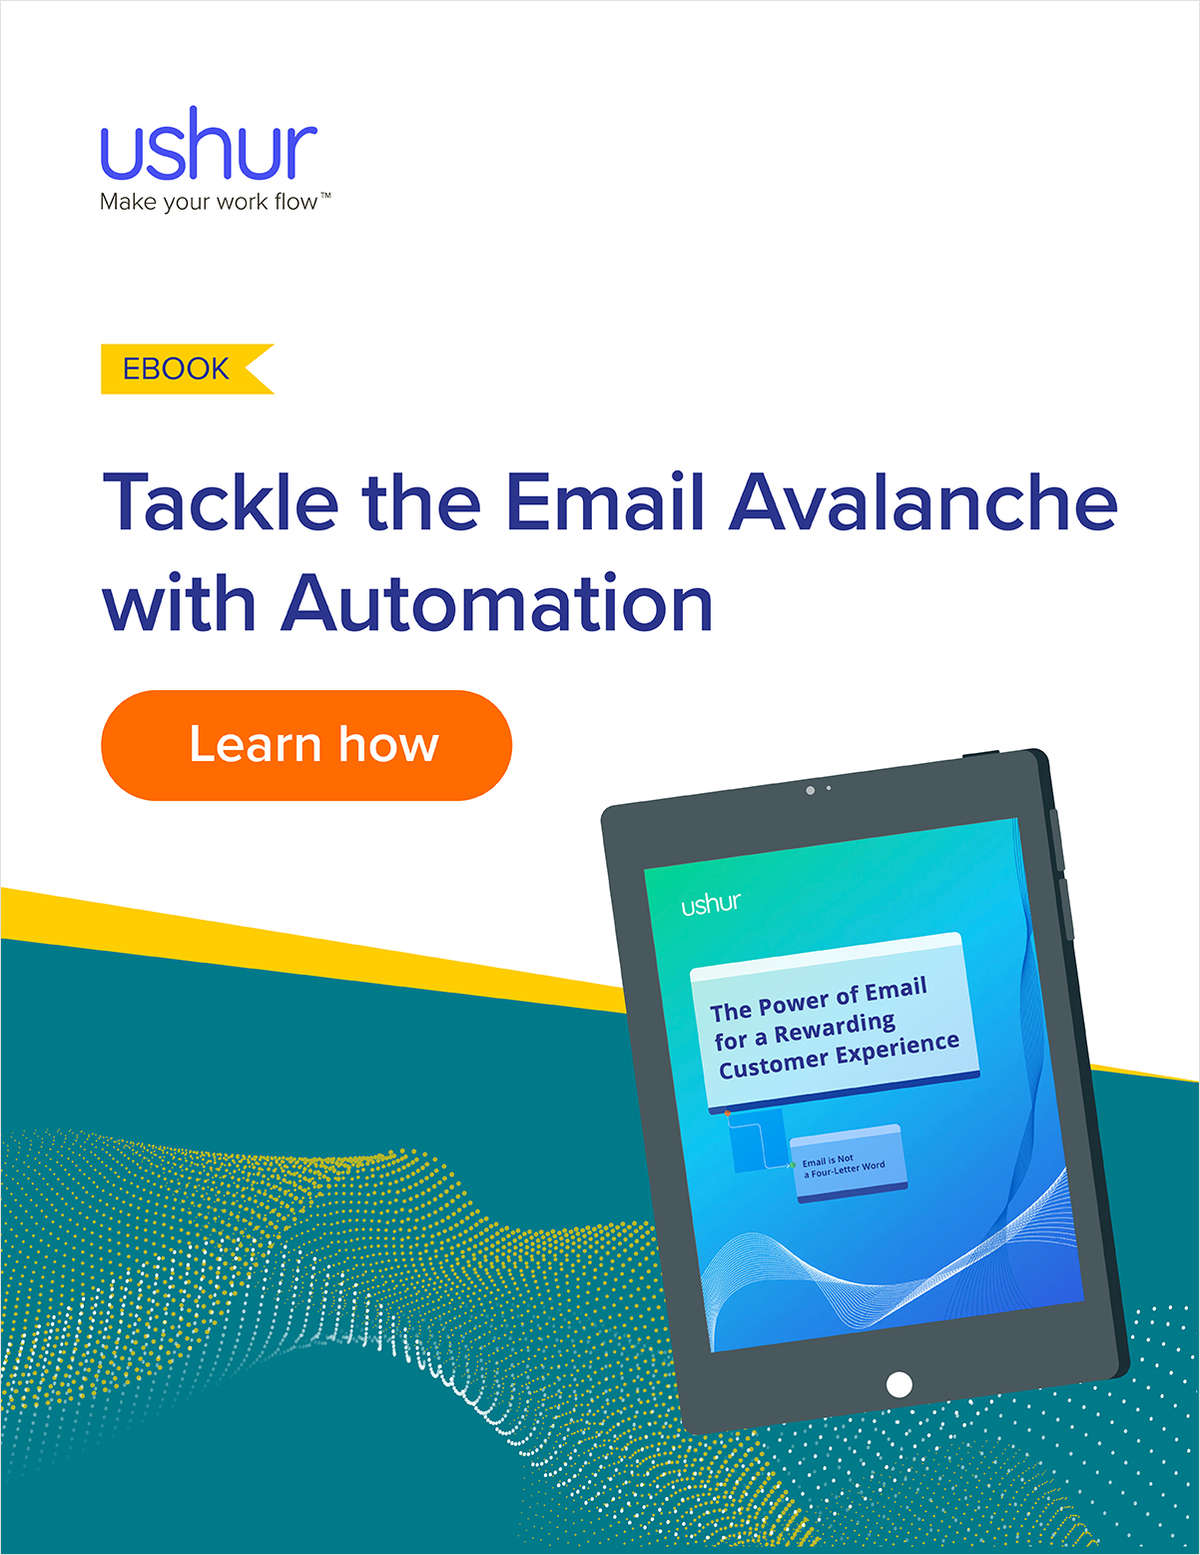 w aaaa17590c8 - The Power of Email for a Rewarding Customer Experience